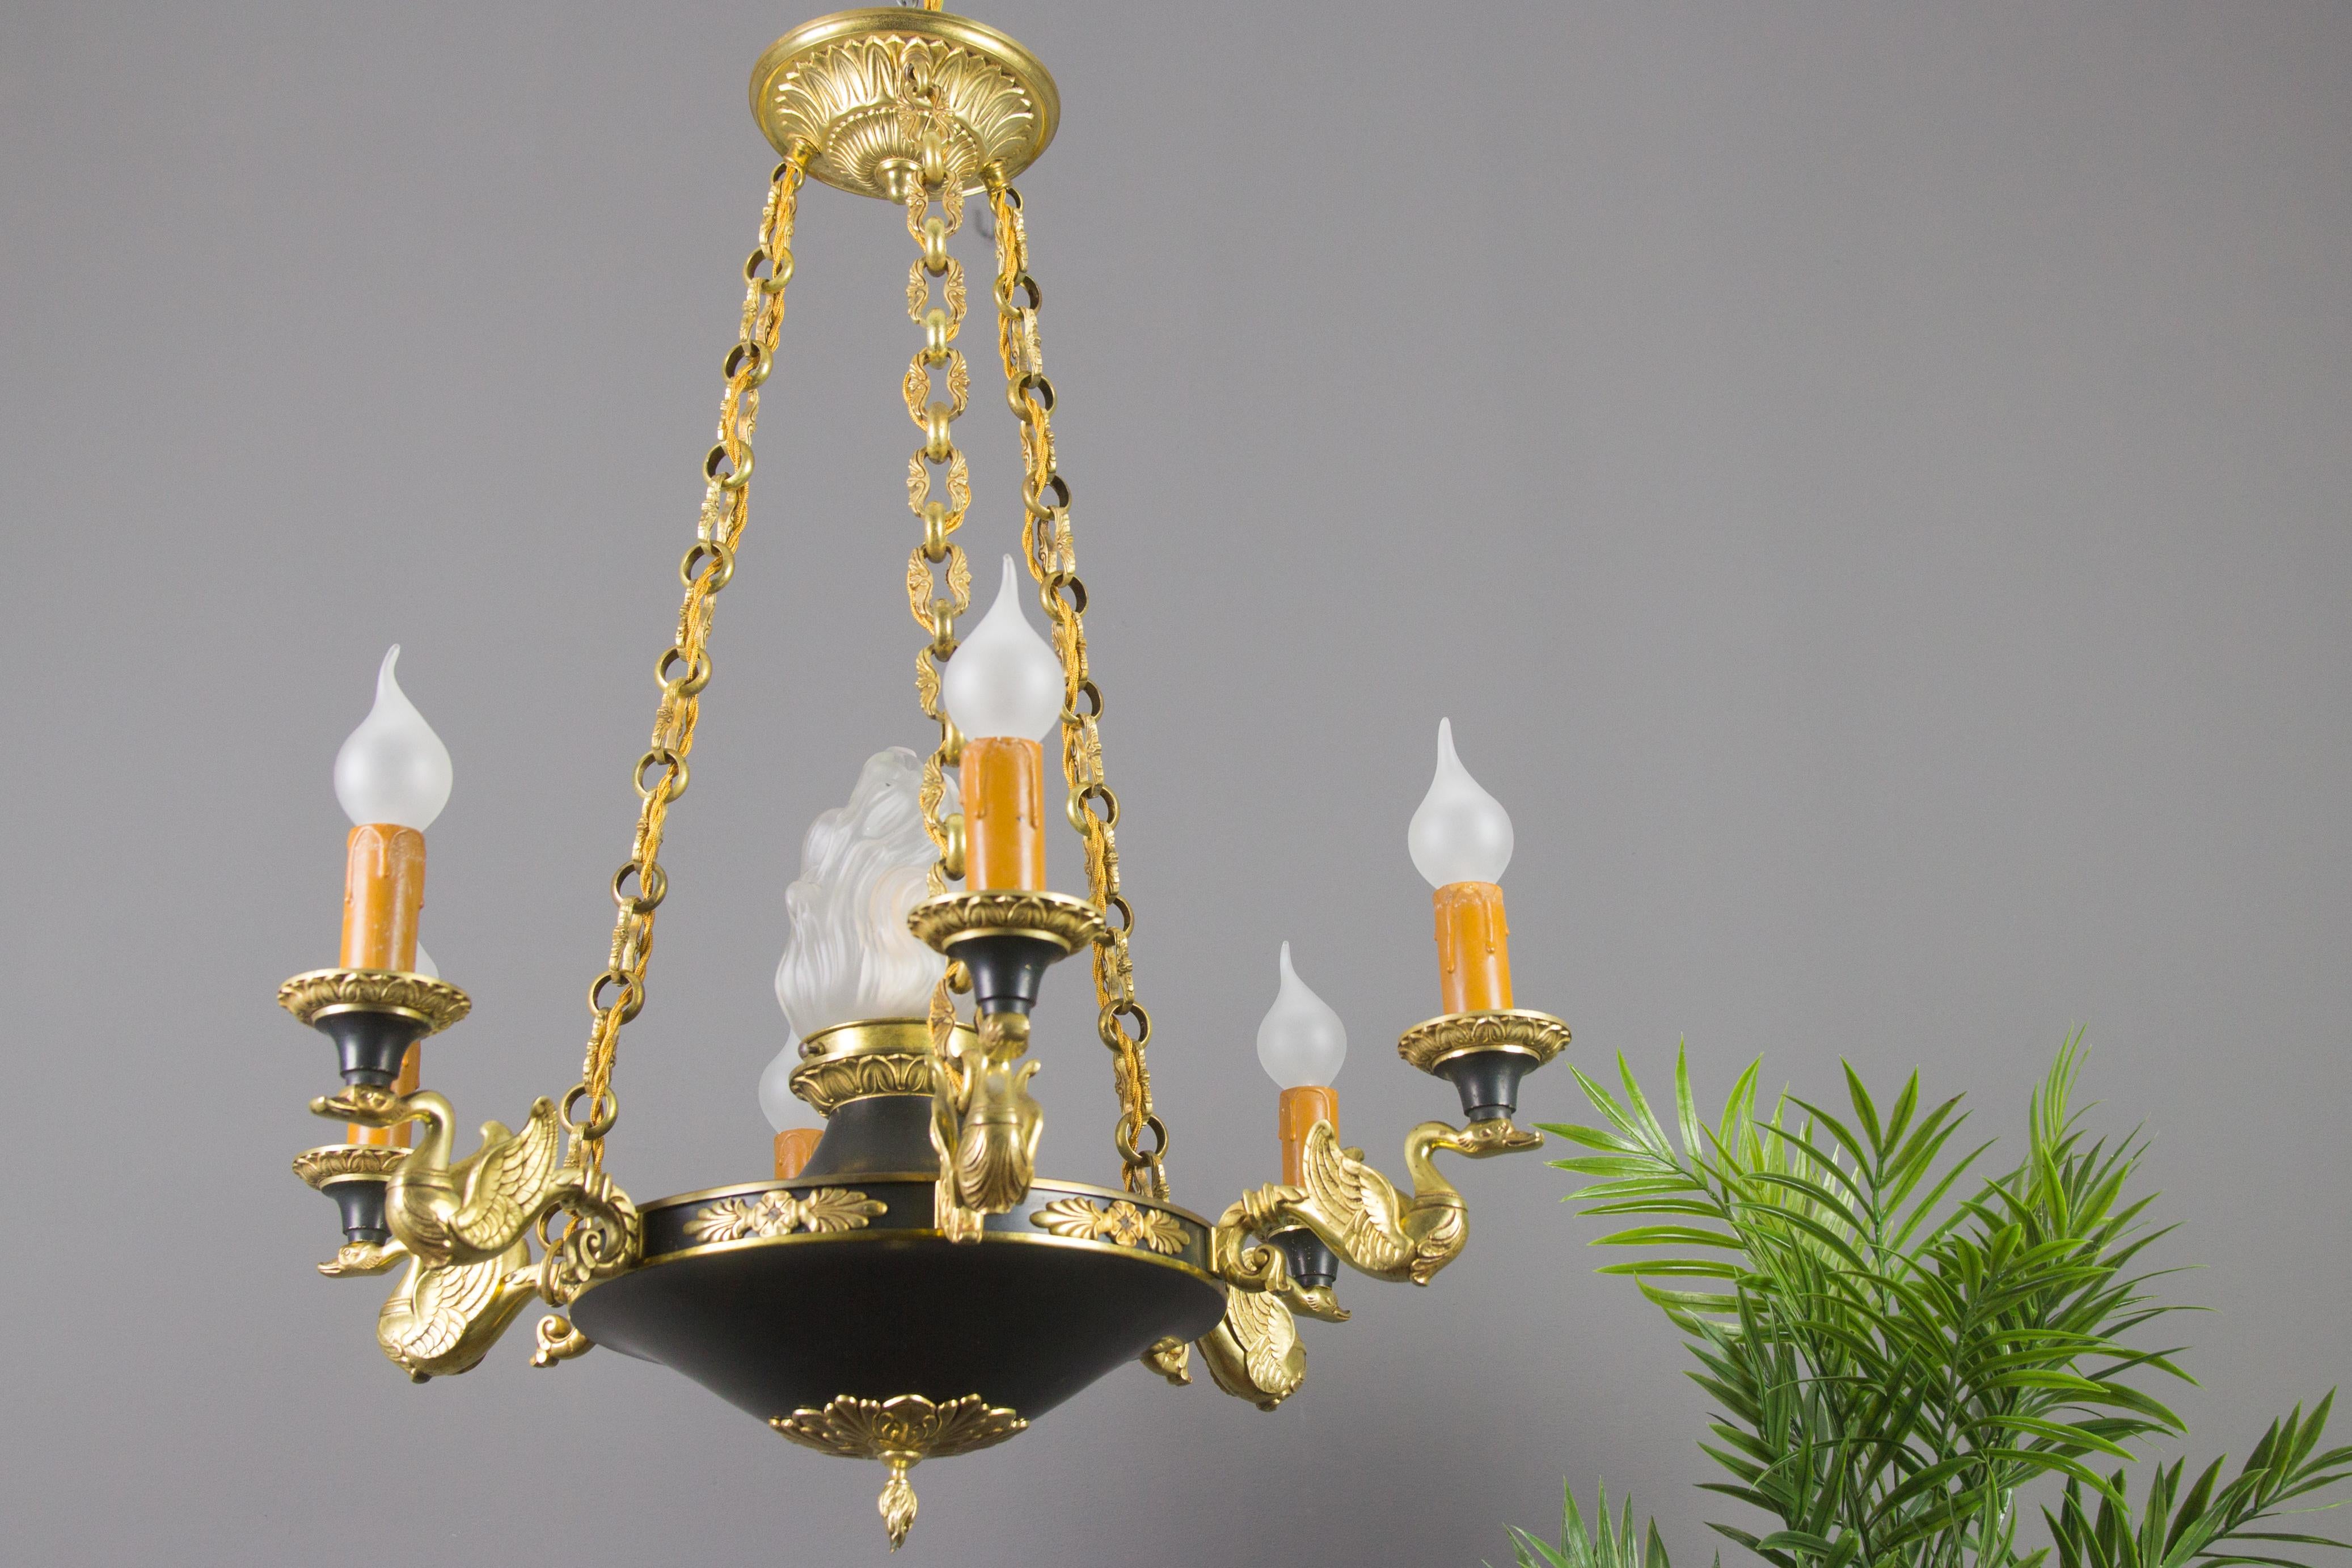 This beautiful French Empire-style chandelier features six bronze swan arms. Dark green painted body with decorative bronze mounts and richly ornate pine finial, on top centered with flame torch glass shade. Impressive and very decorative